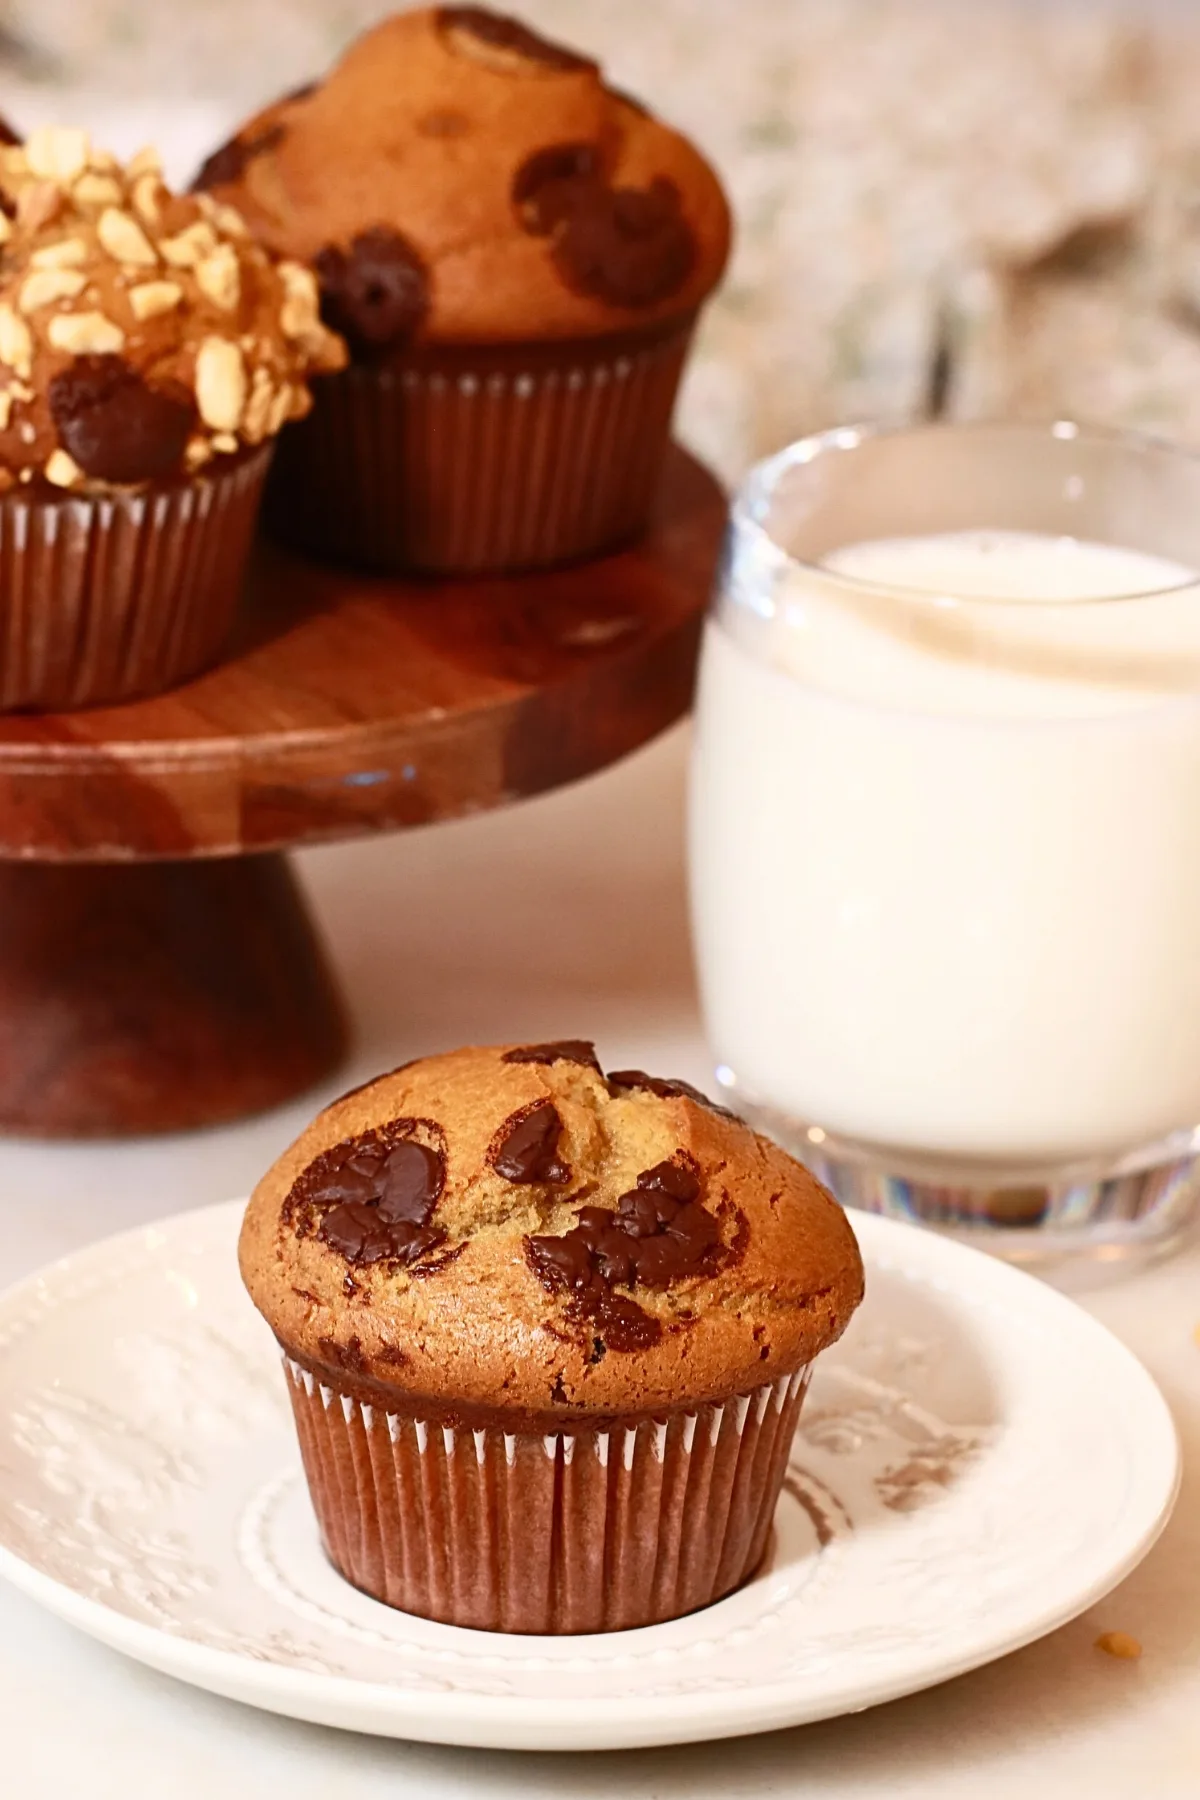 a homemade chocolate chip peanut butter muffin on a white plate